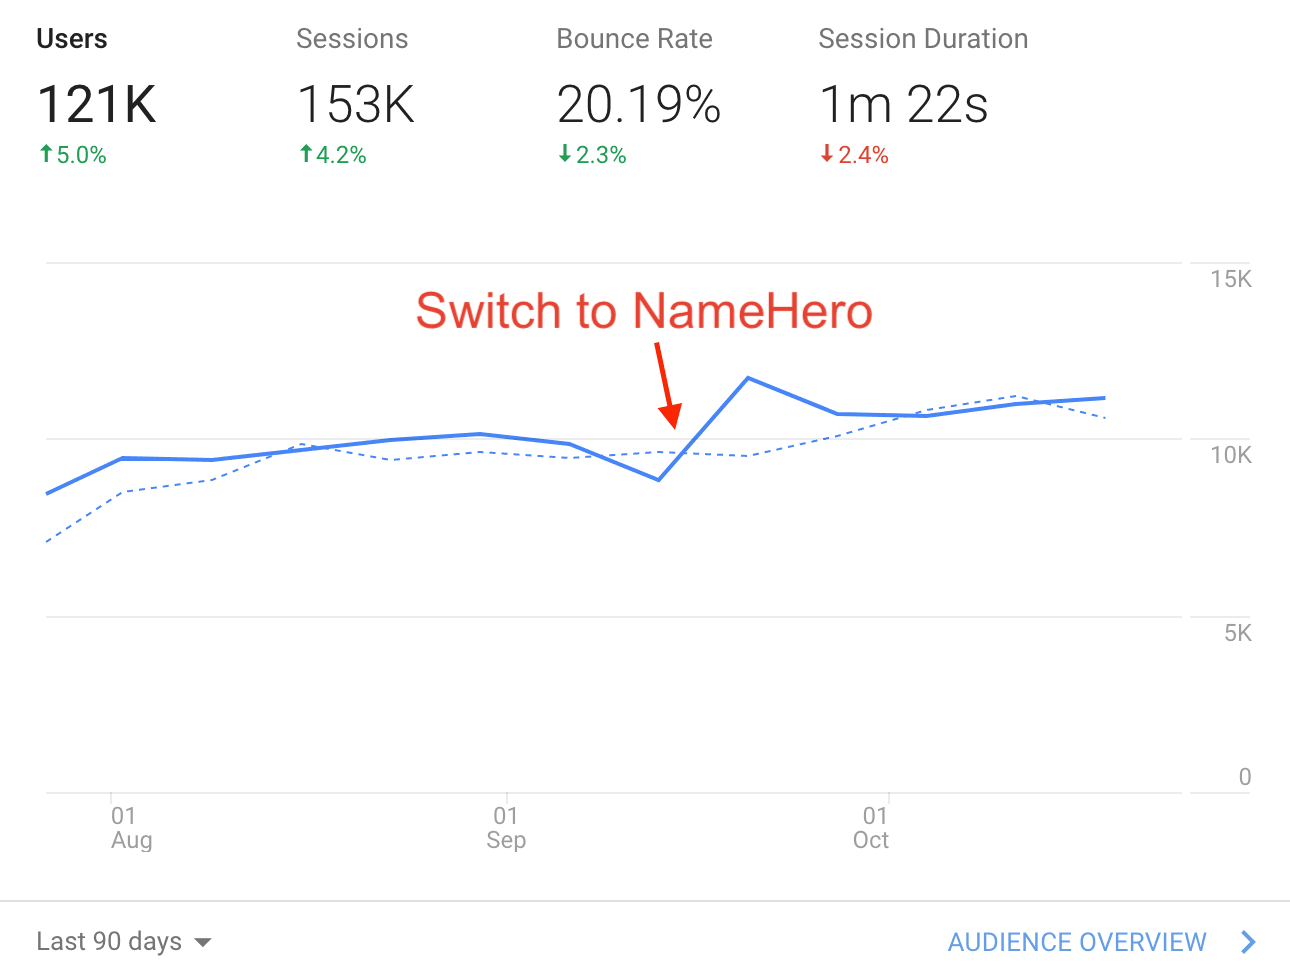 Namehero hosting - increase in sessions after switching, faster